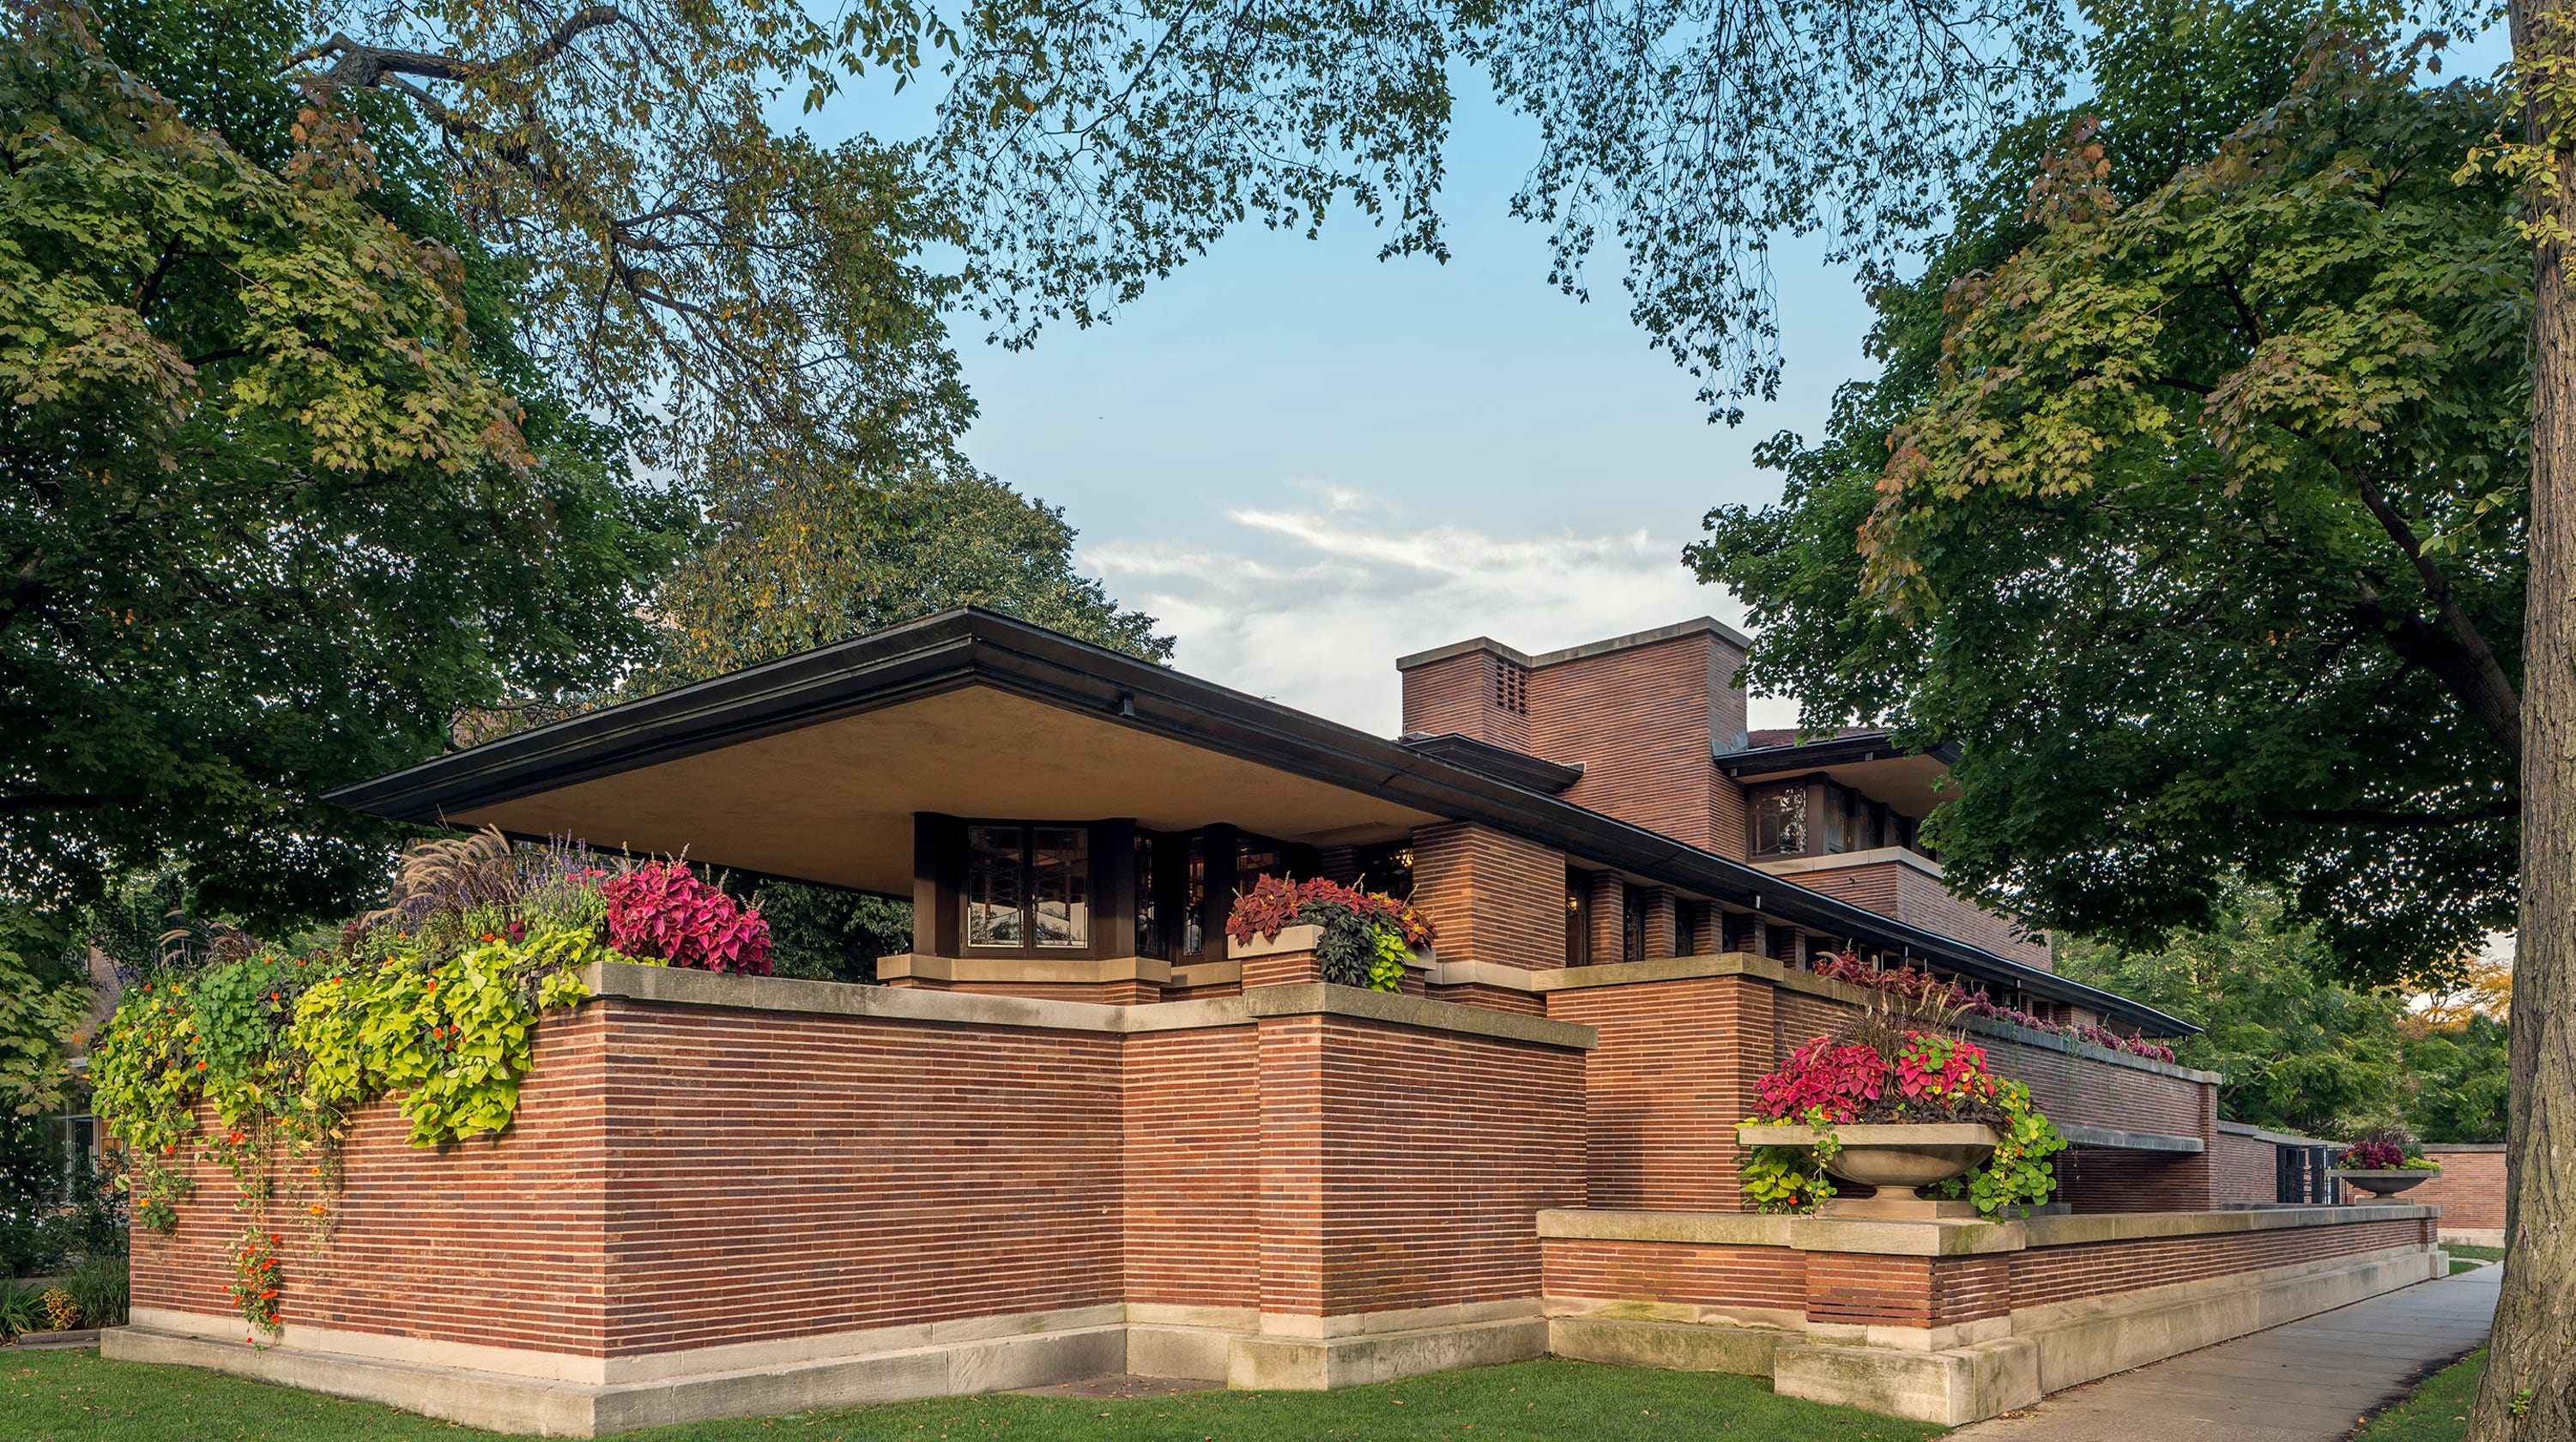 The Robie House, An Aesthetic Flat Landscape 